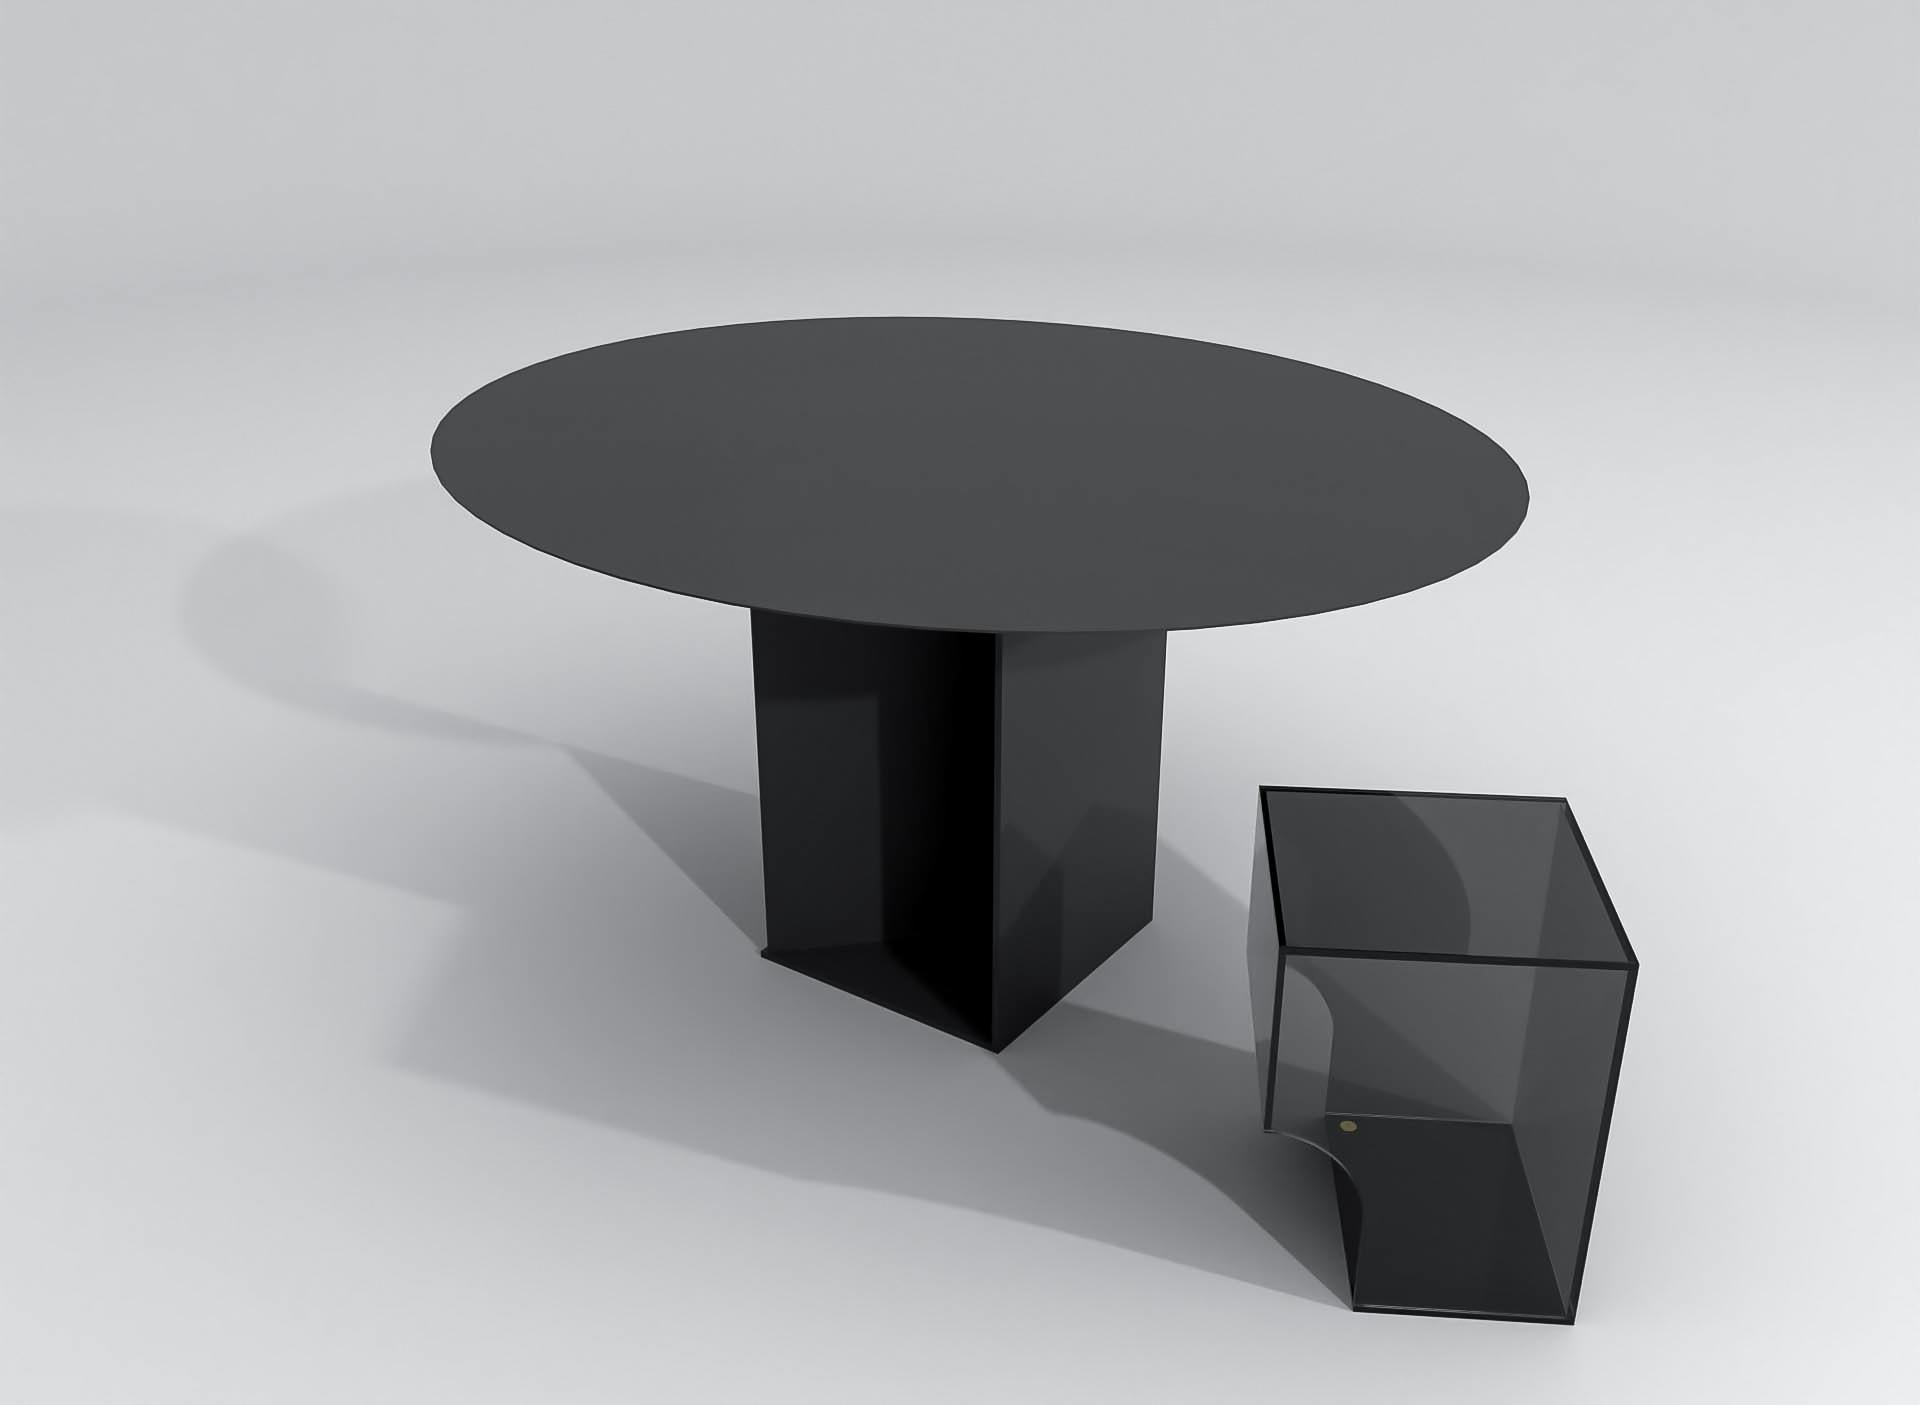 Minimalist Contemporary Round Table in Black Powdercoated Stainless Steel, Barh Judd Table For Sale